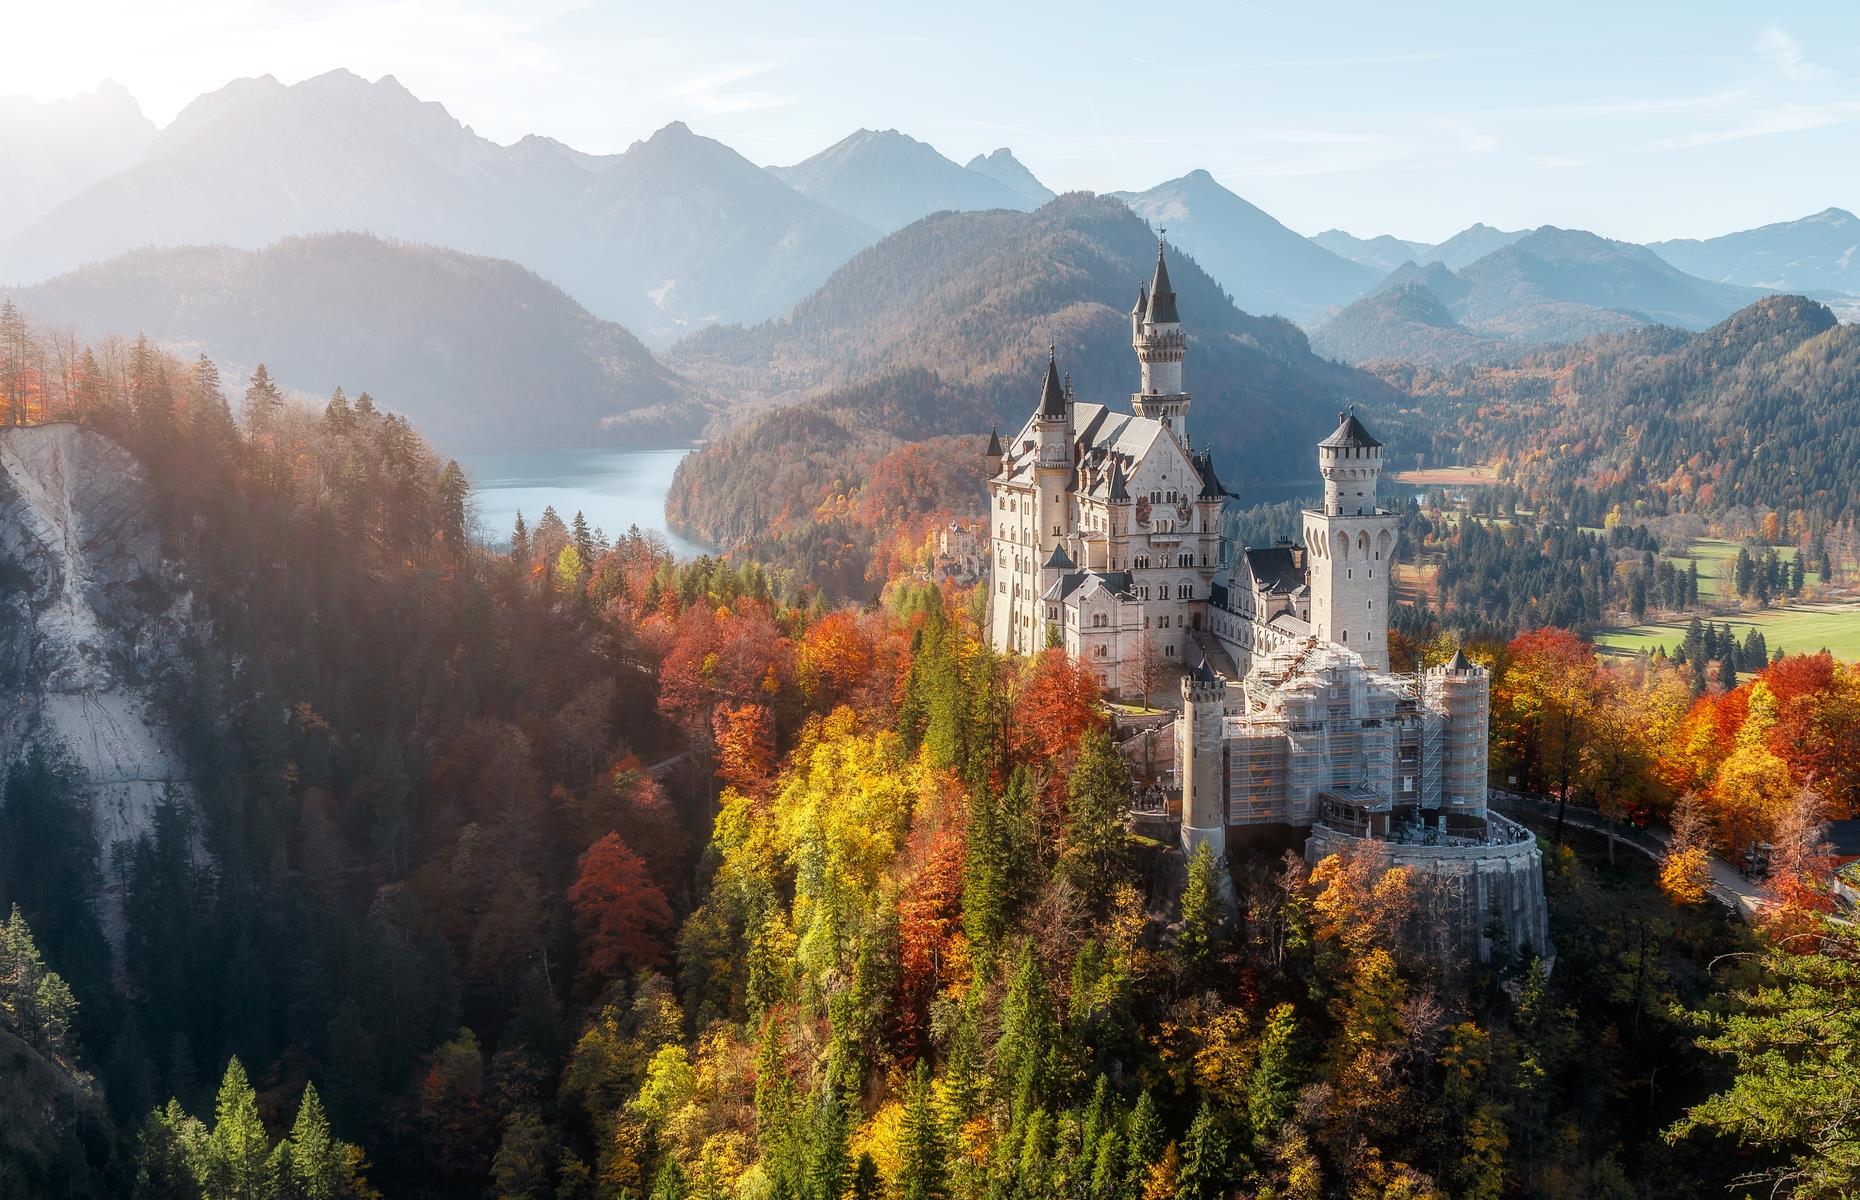 <p>Ludwig II, King of Bavaria, envisioned Neuschwanstein Castle “breathing the air of heaven.” Perched high in the German Alps, the Romanesque Neuschwanstein is a fantastical fairy-tale castle.</p>  <p><strong>Liking this? Click on the Follow button above for more great stories from loveEXPLORING</strong></p>